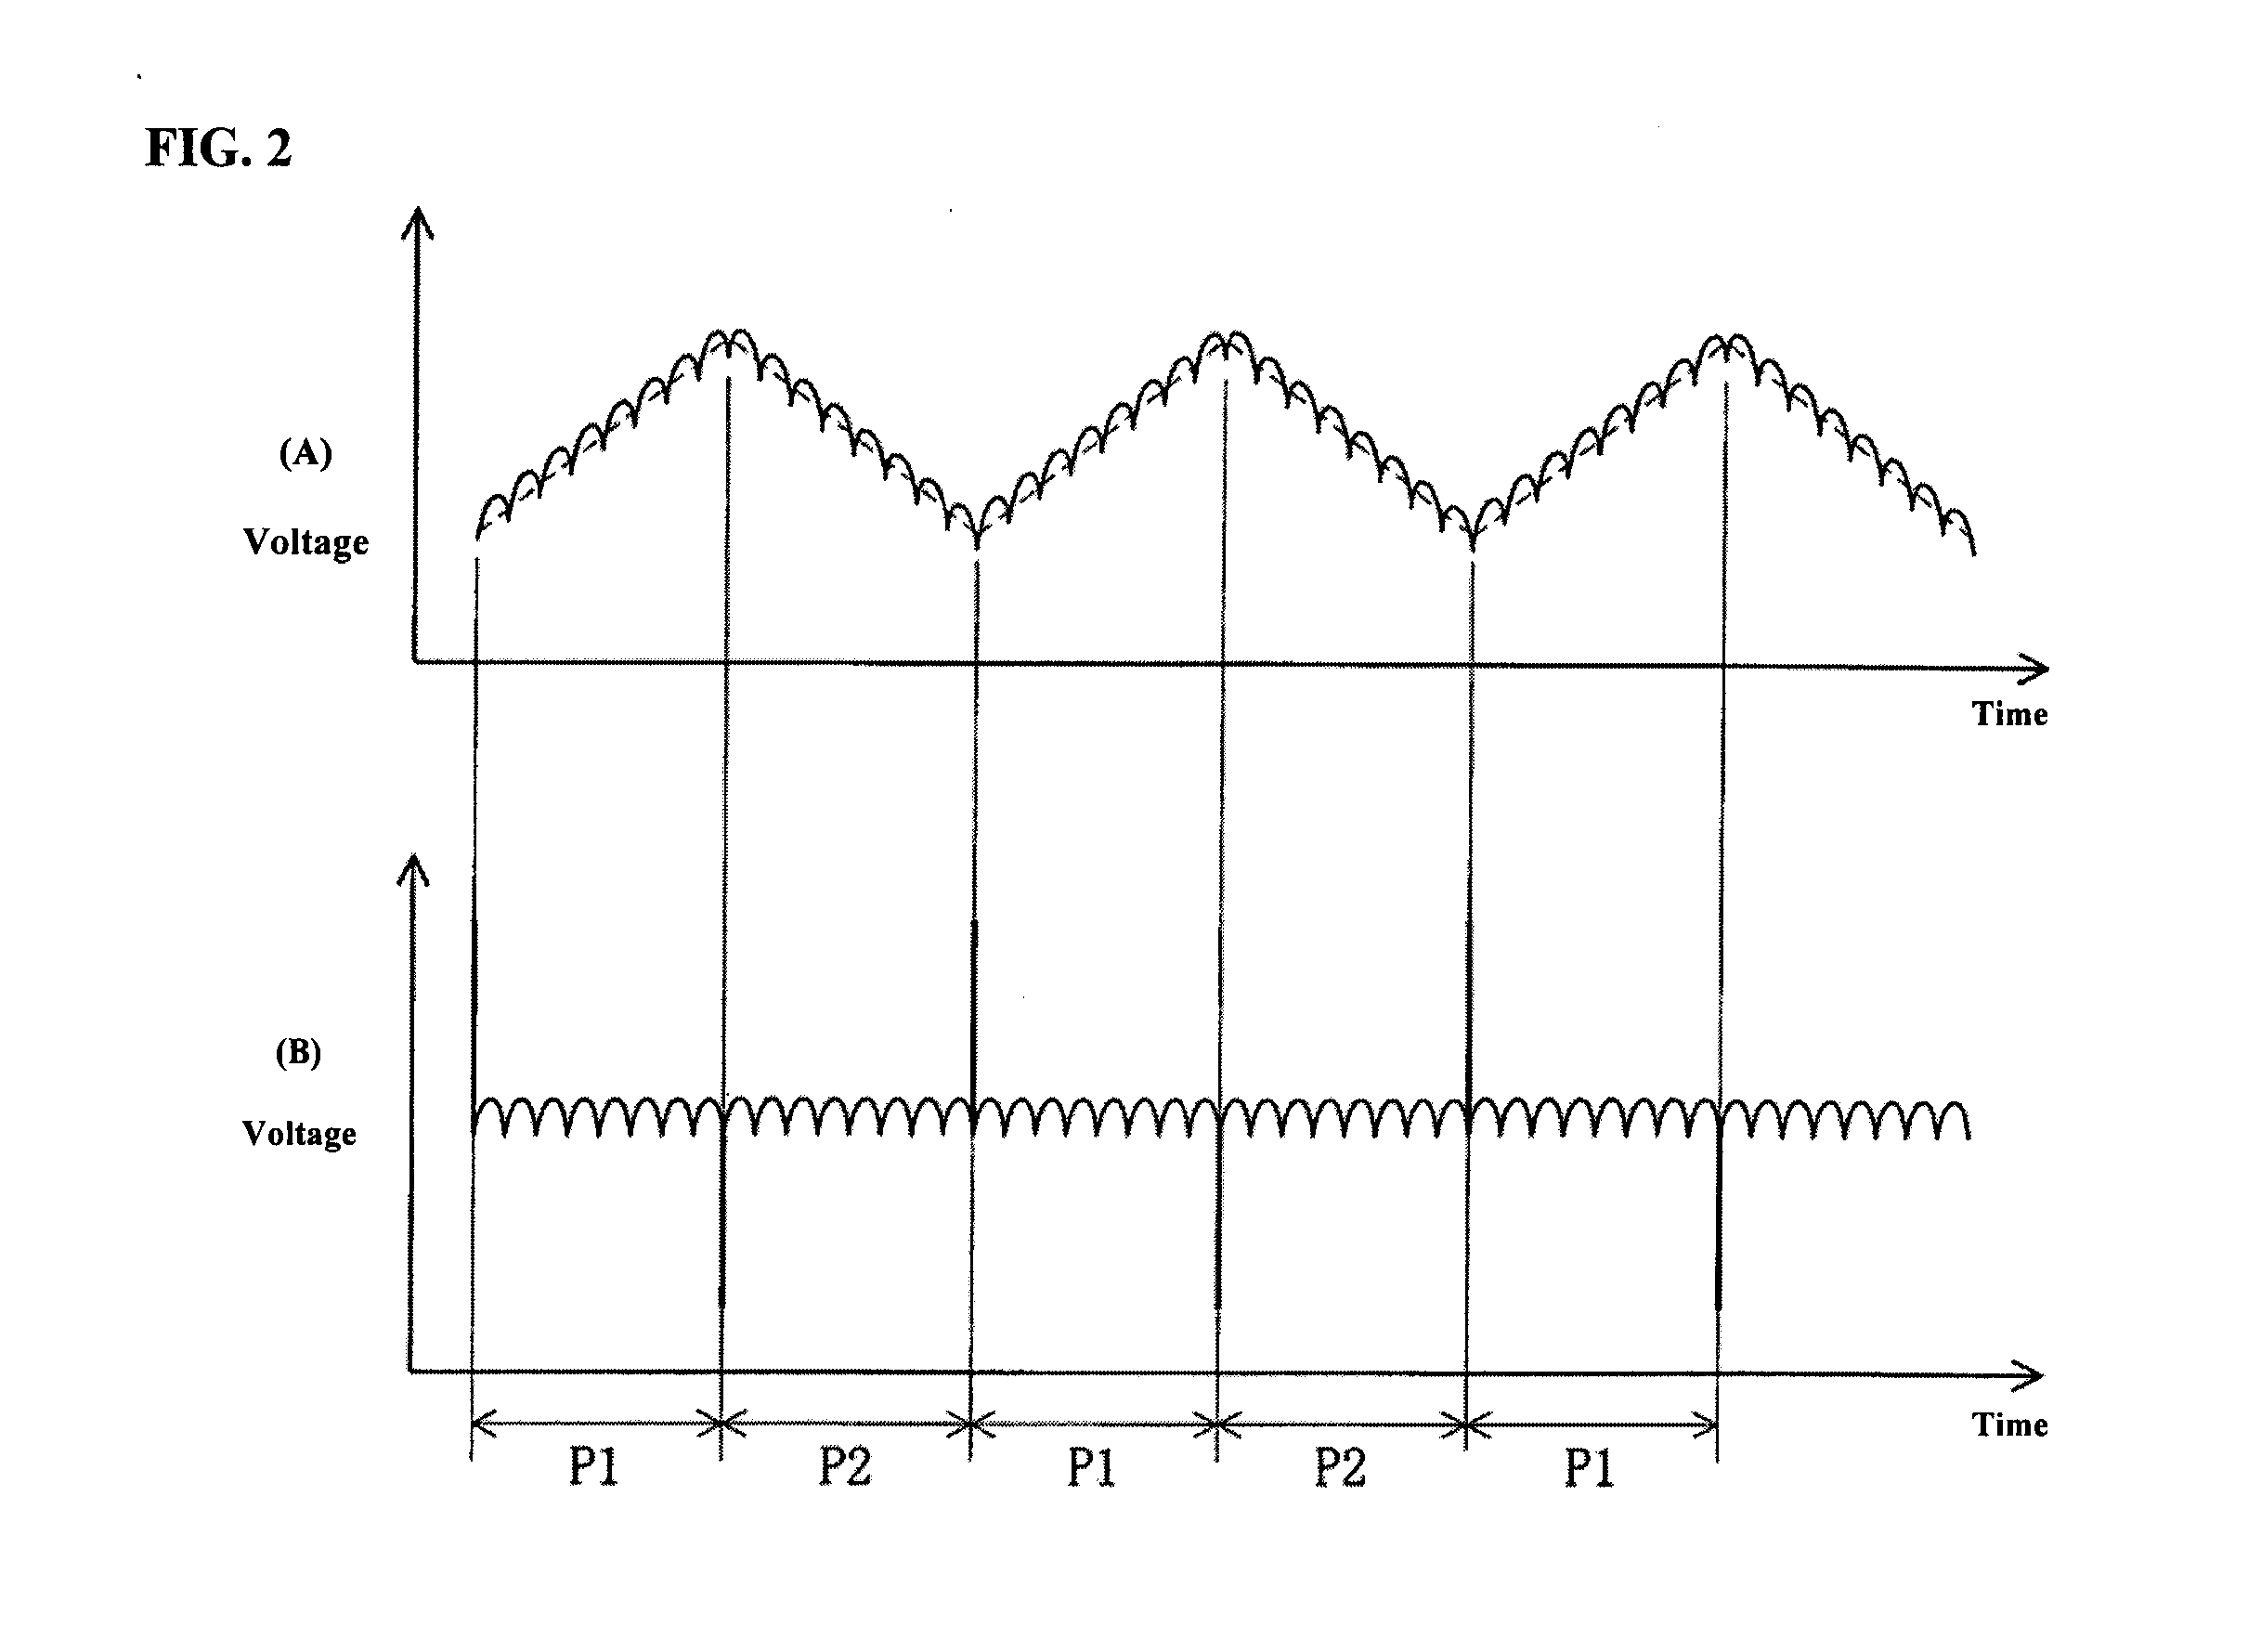 Signal evaluating device and signal evaluating method